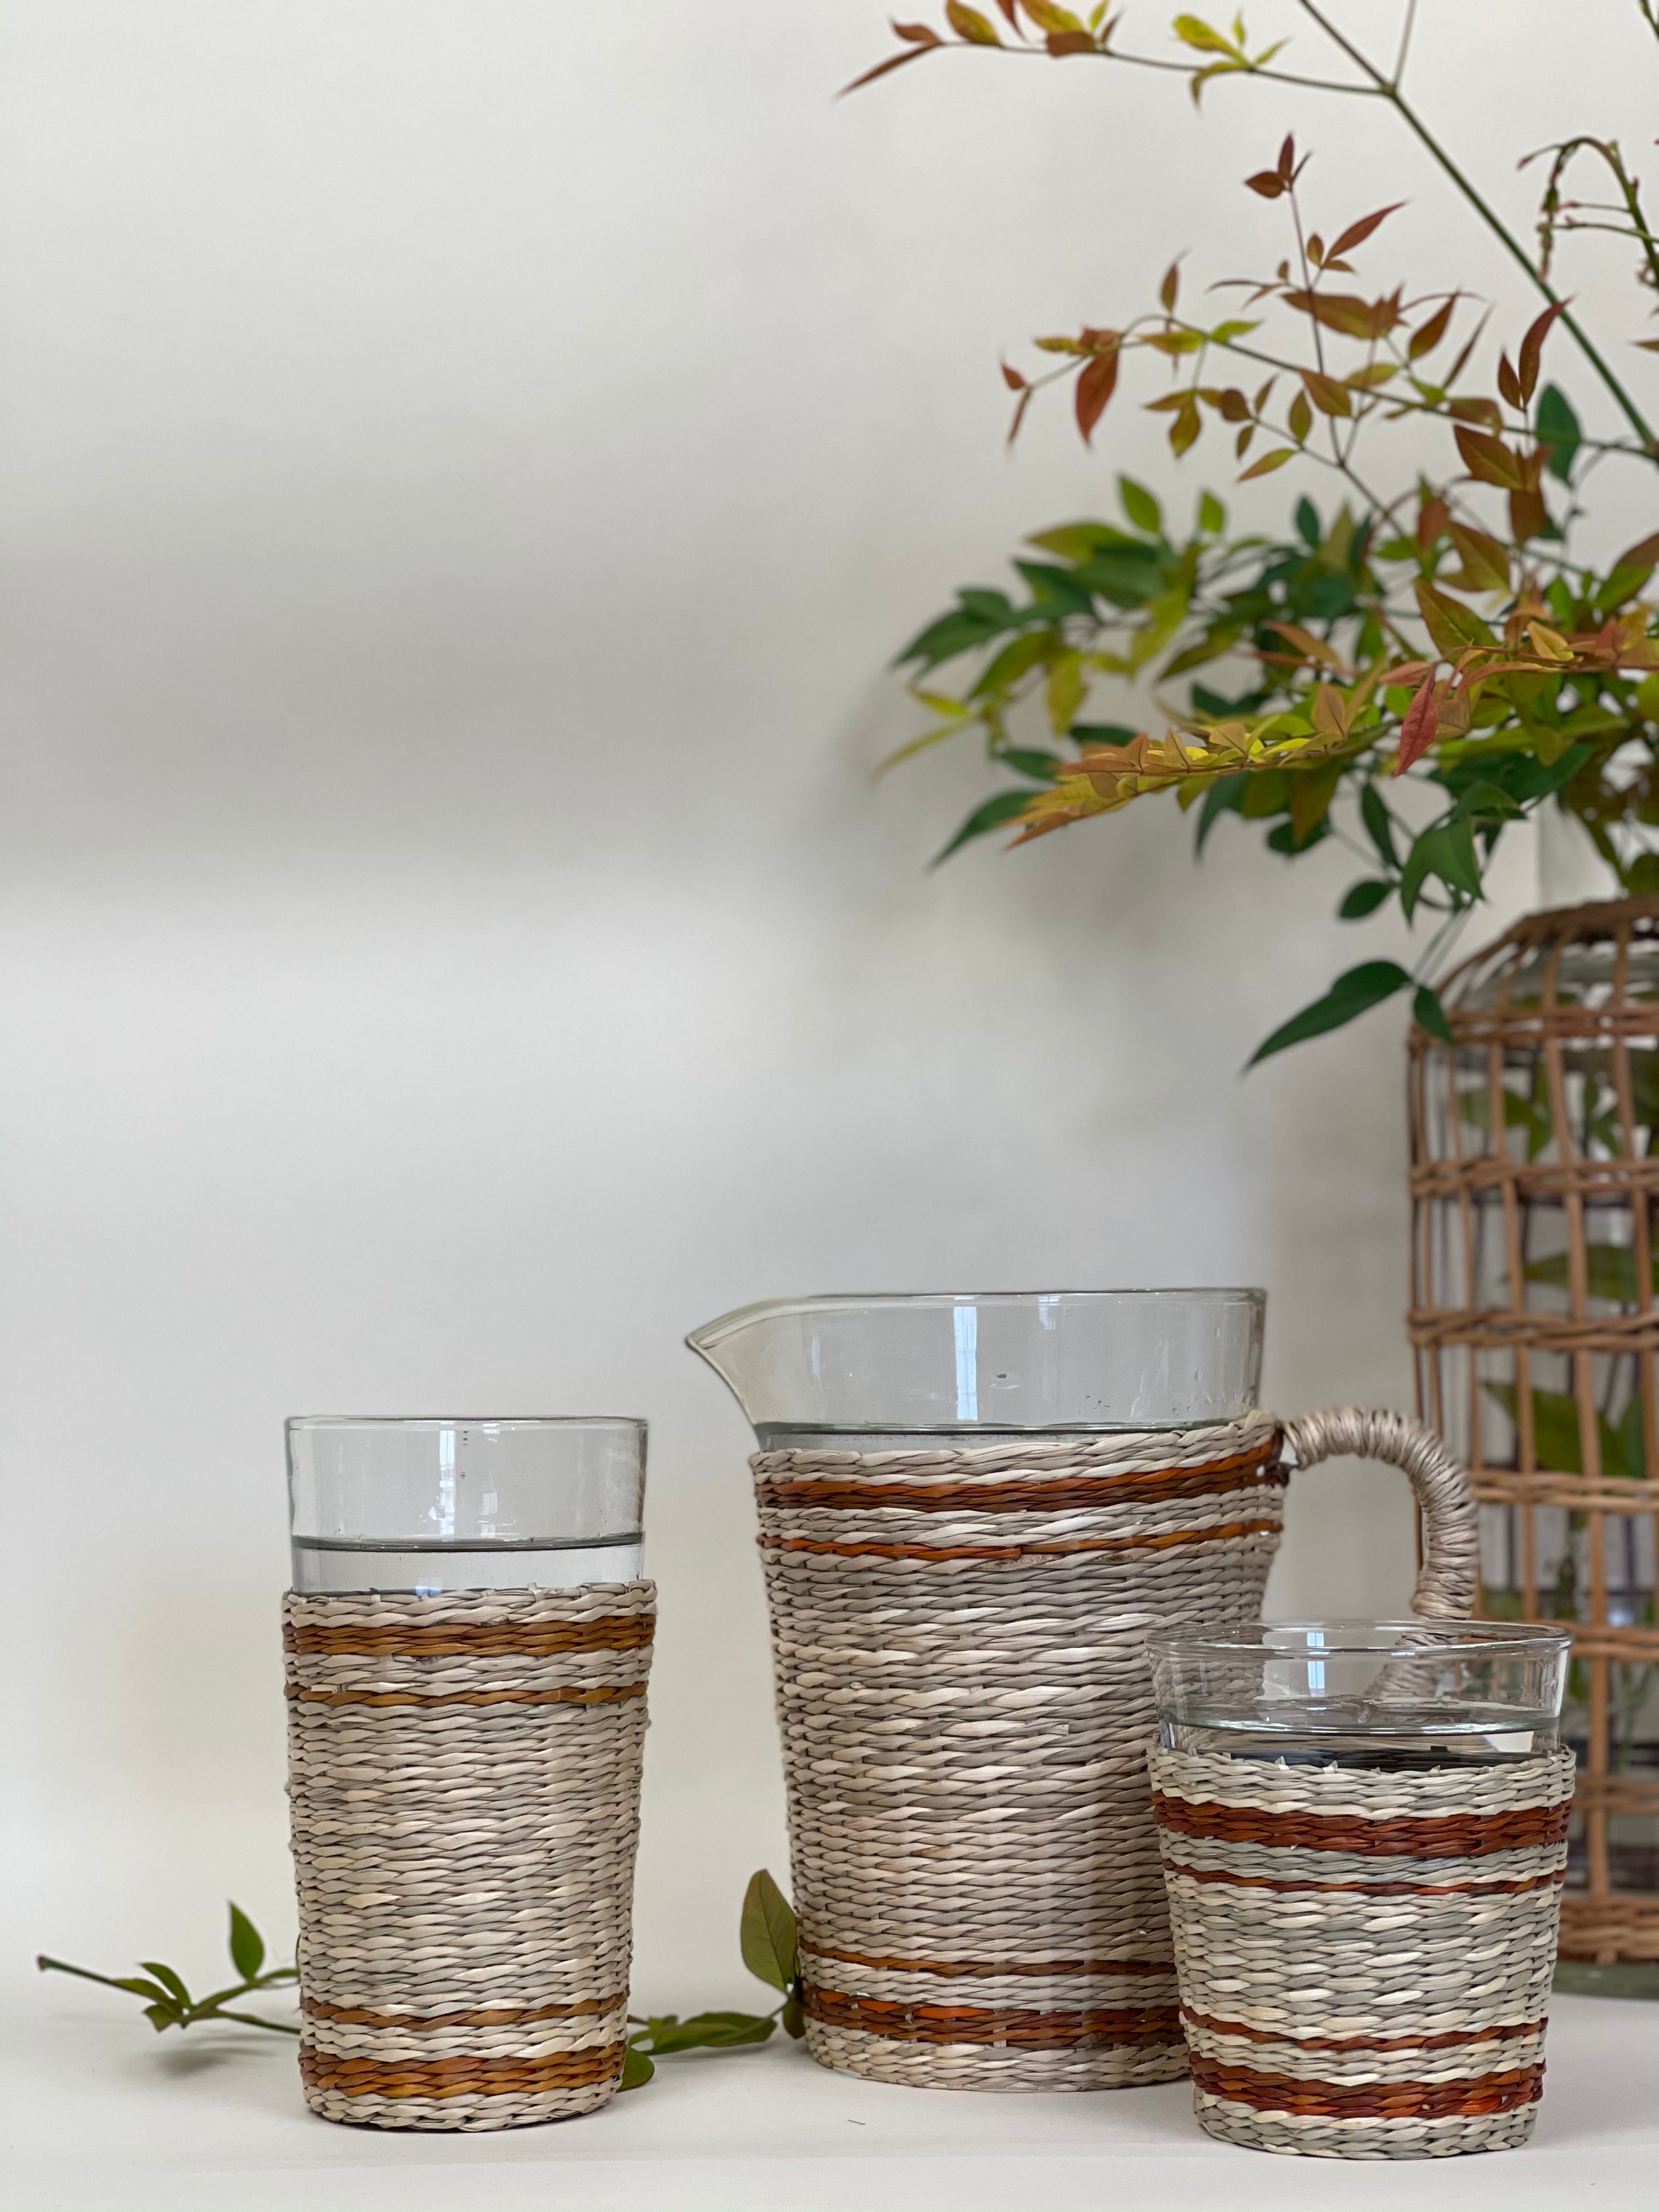 Brown Striped Seagrass Highball (Now 25% off!) Glass Seagrass Brand_Seagrass & Rattan Kitchen_Drinkware lm New Arrivals Seagrass Tumblers & Highballs 018EFEFB-7DF0-4C9E-9822-2D07C51F9DB1